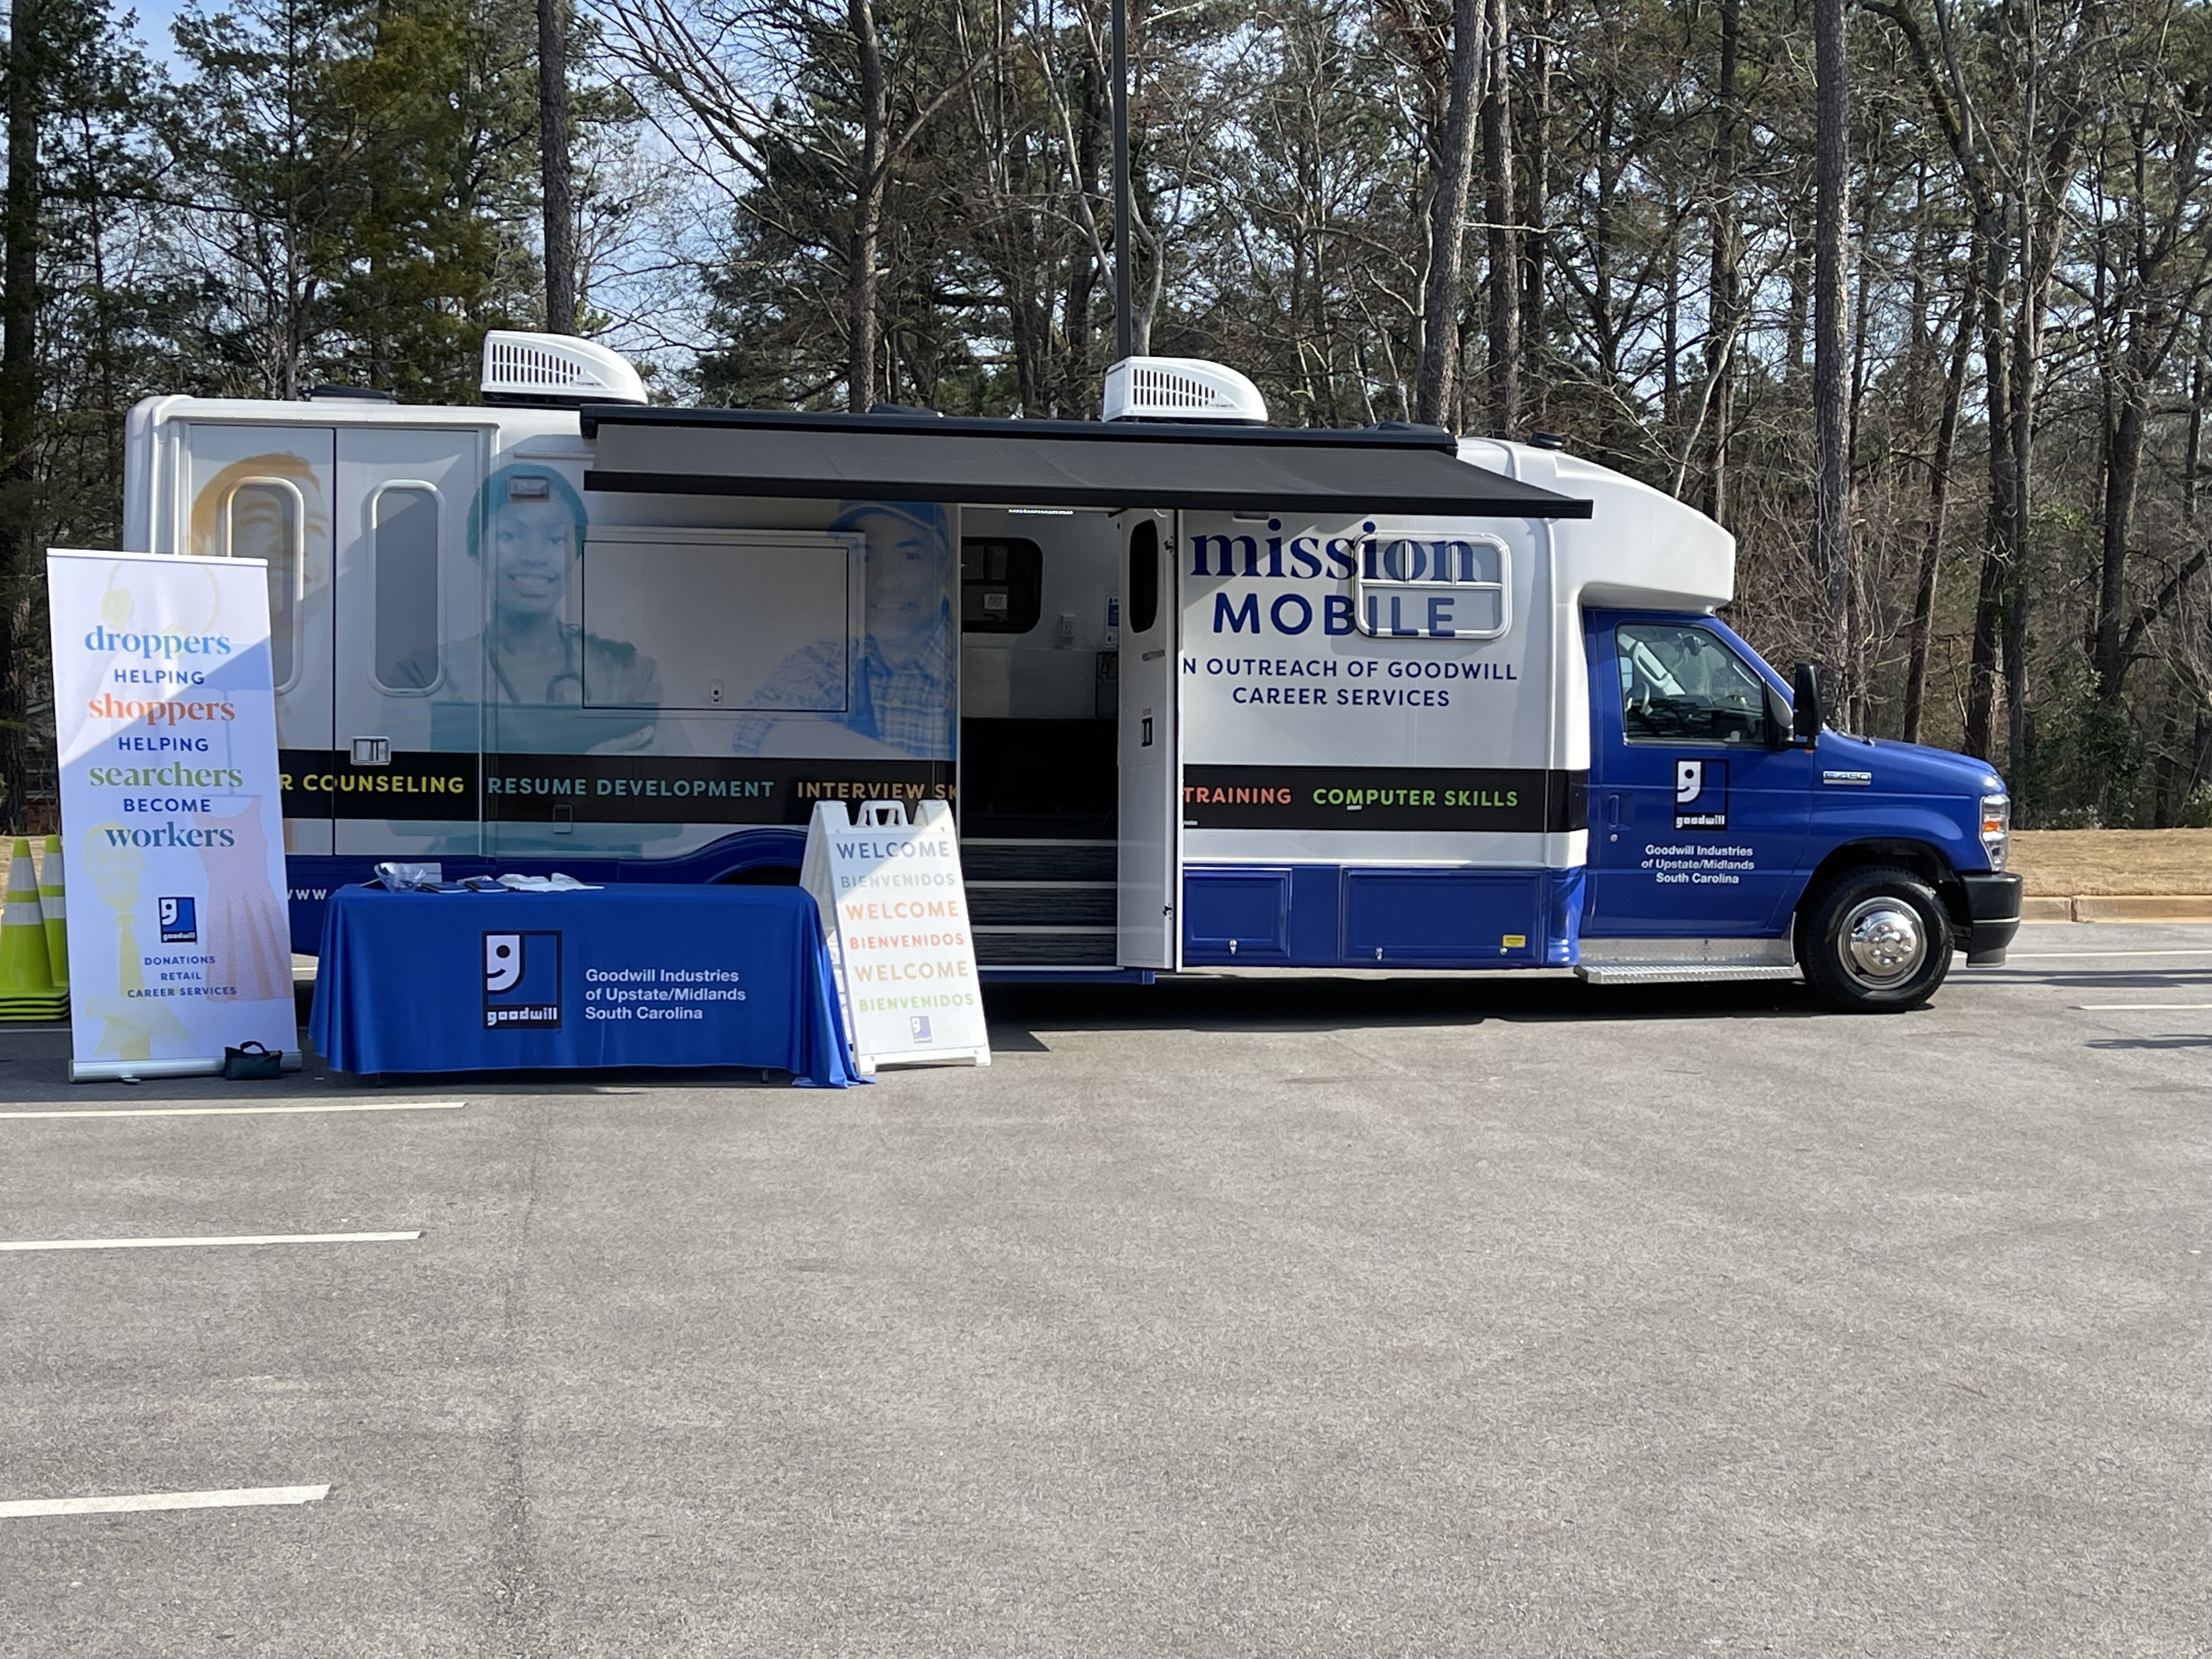 Goodwill Mission Mobile bus set up for business with informational signs and table